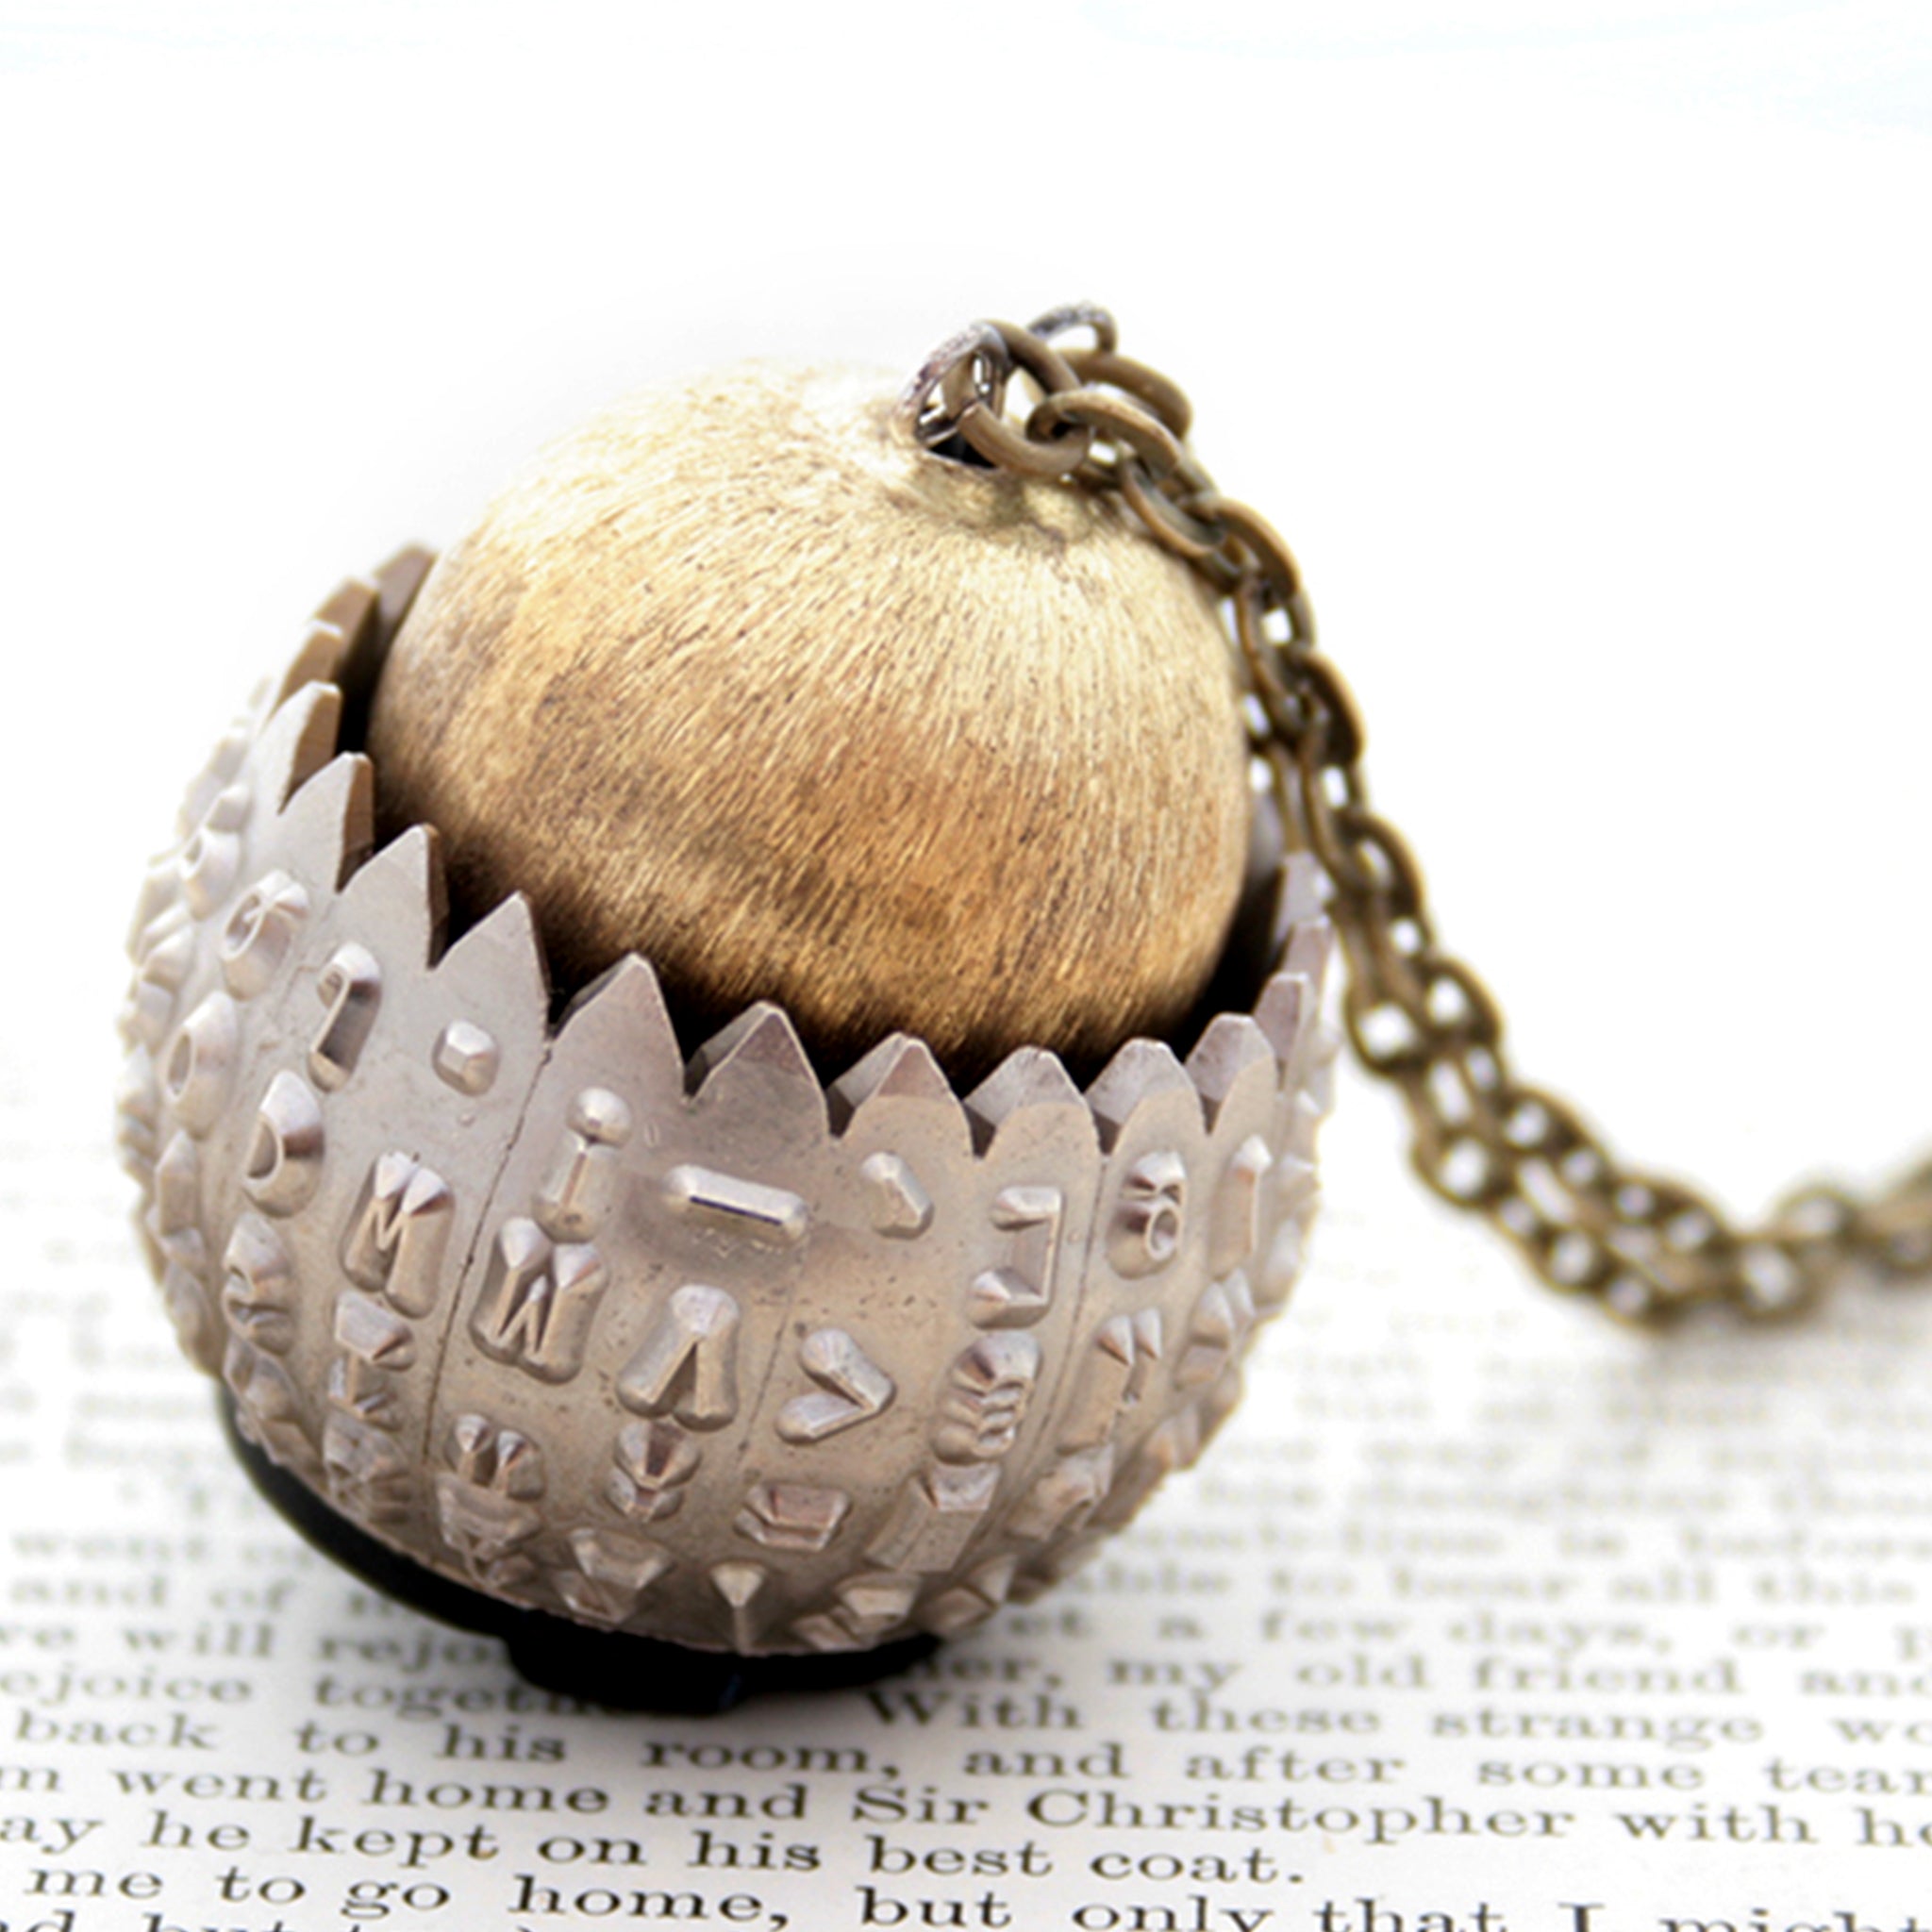 IBM Selectric typewriter font ball with large gold tone bead turned into eye catching necklace